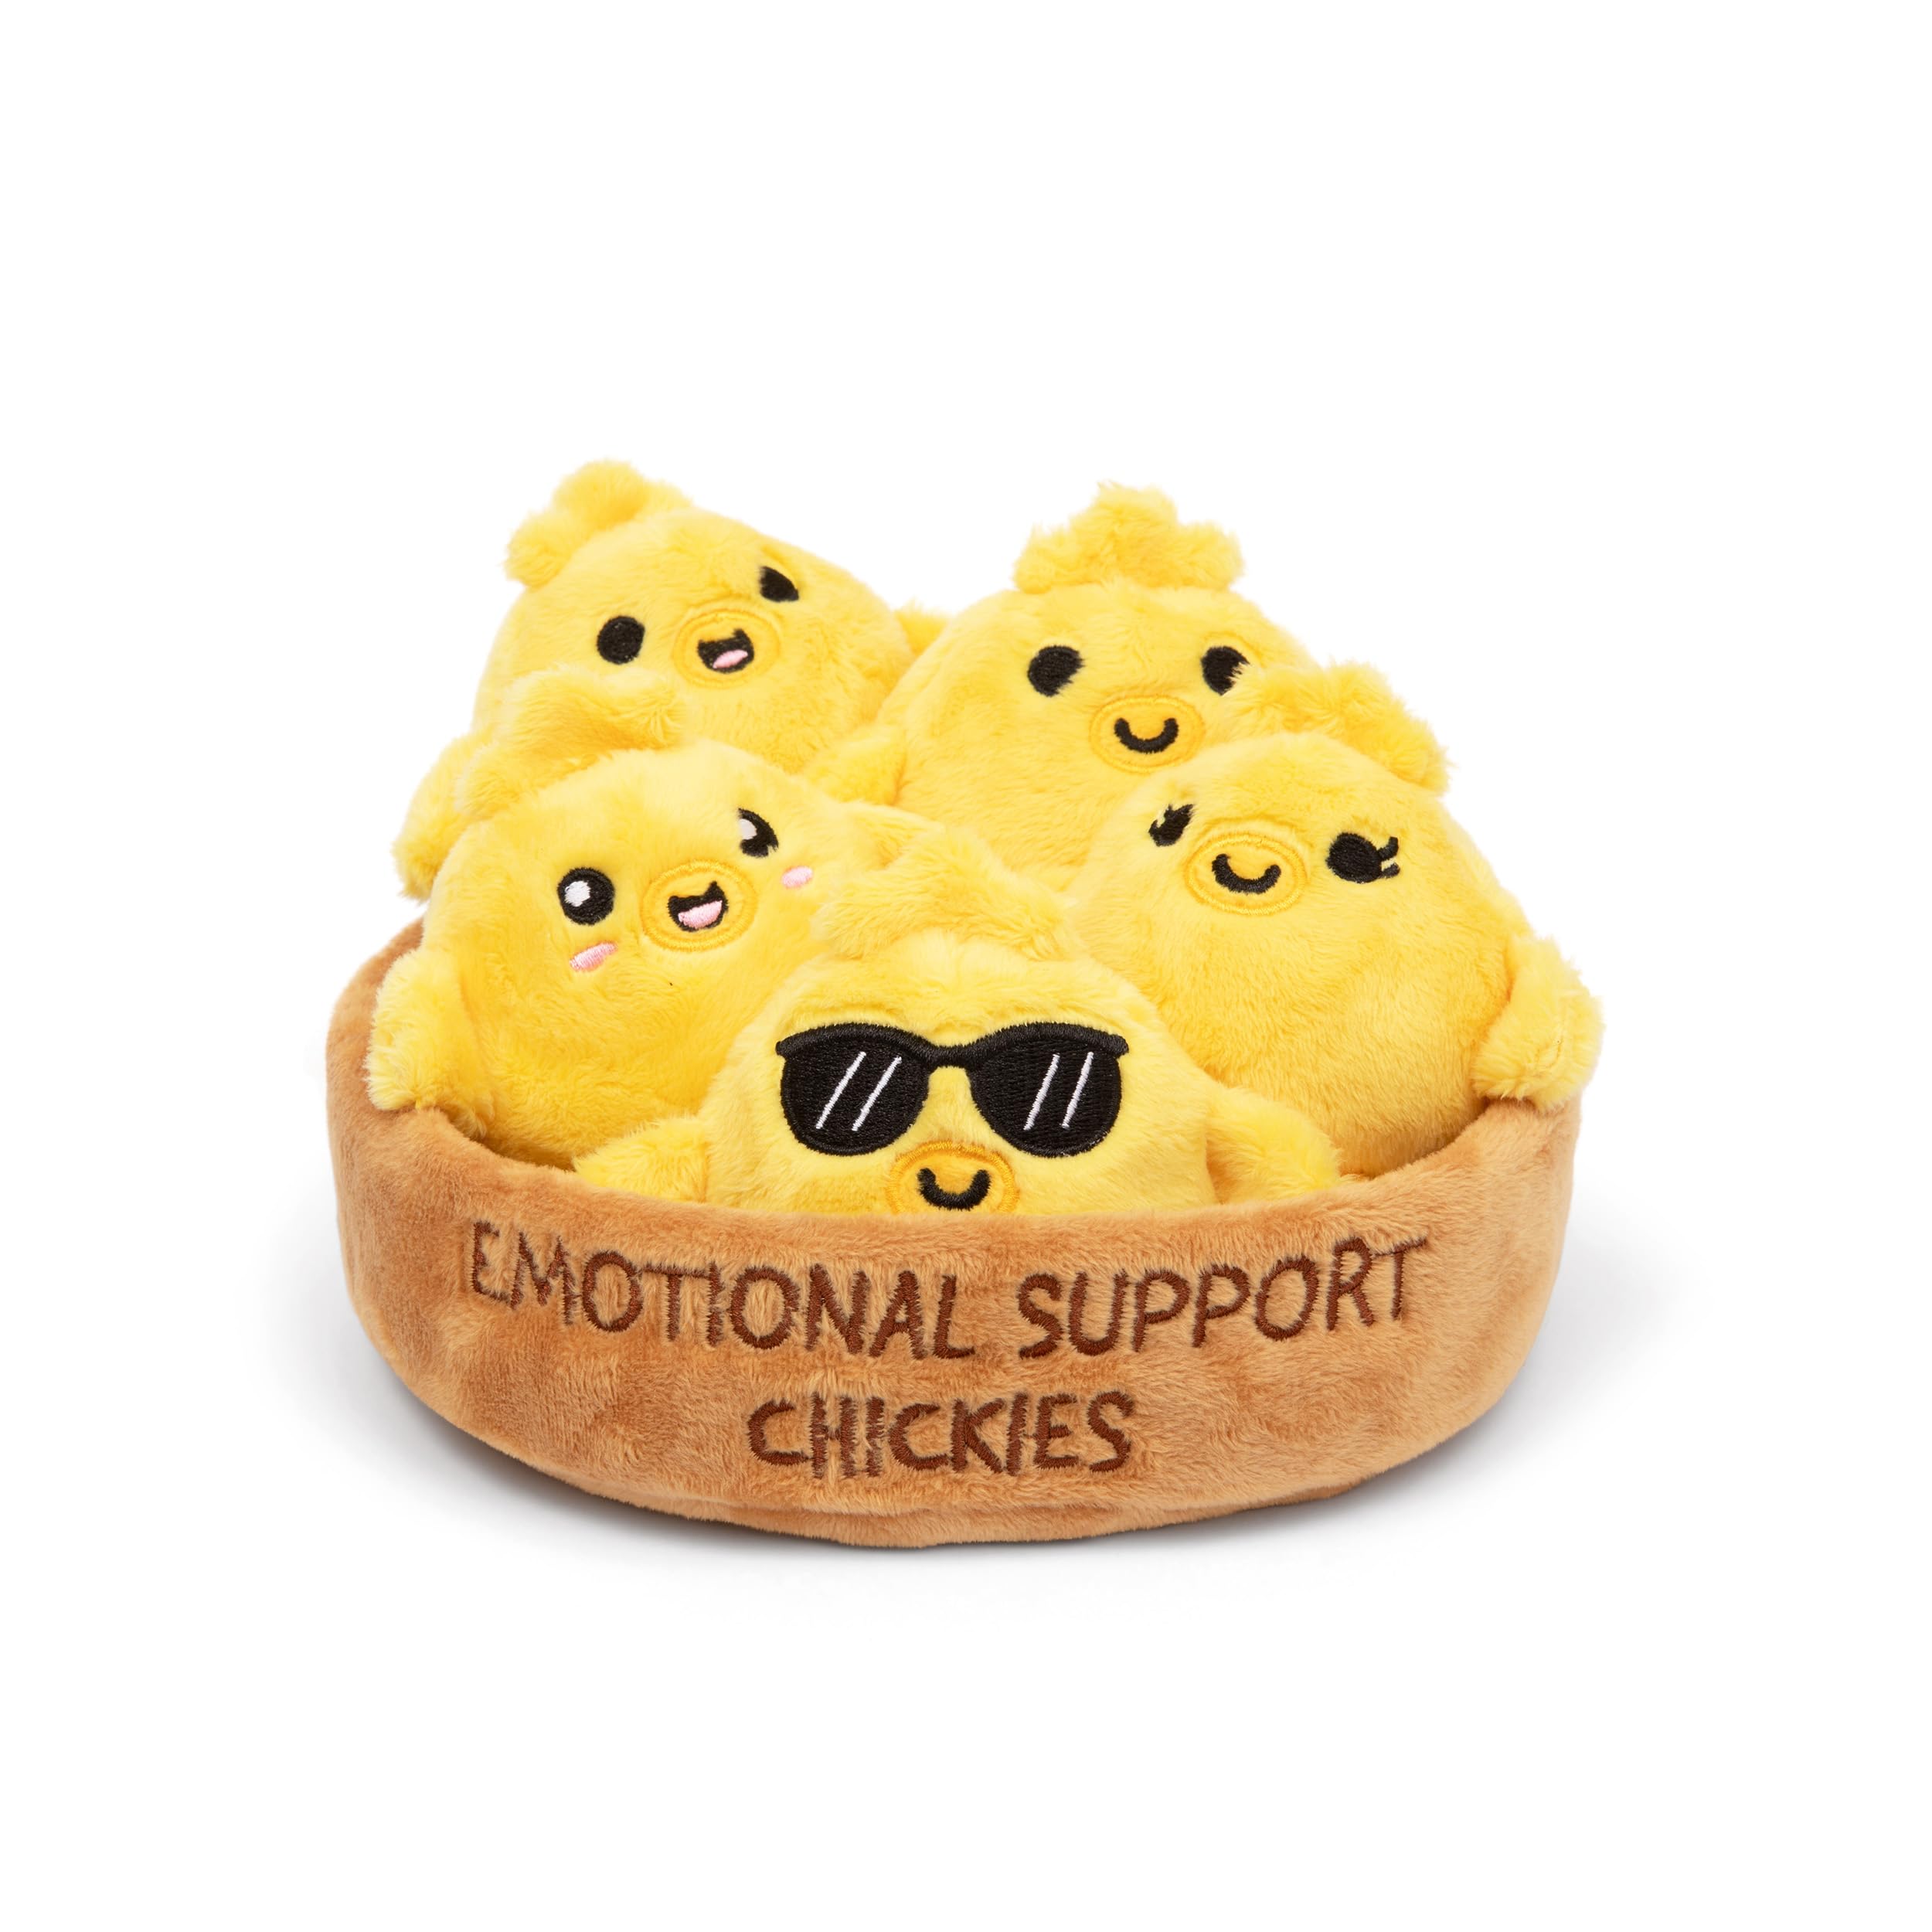 What Do You Meme Emotional Support Chickies - Unique Gifts for Valentine's Day, Cute Chicken Plushies